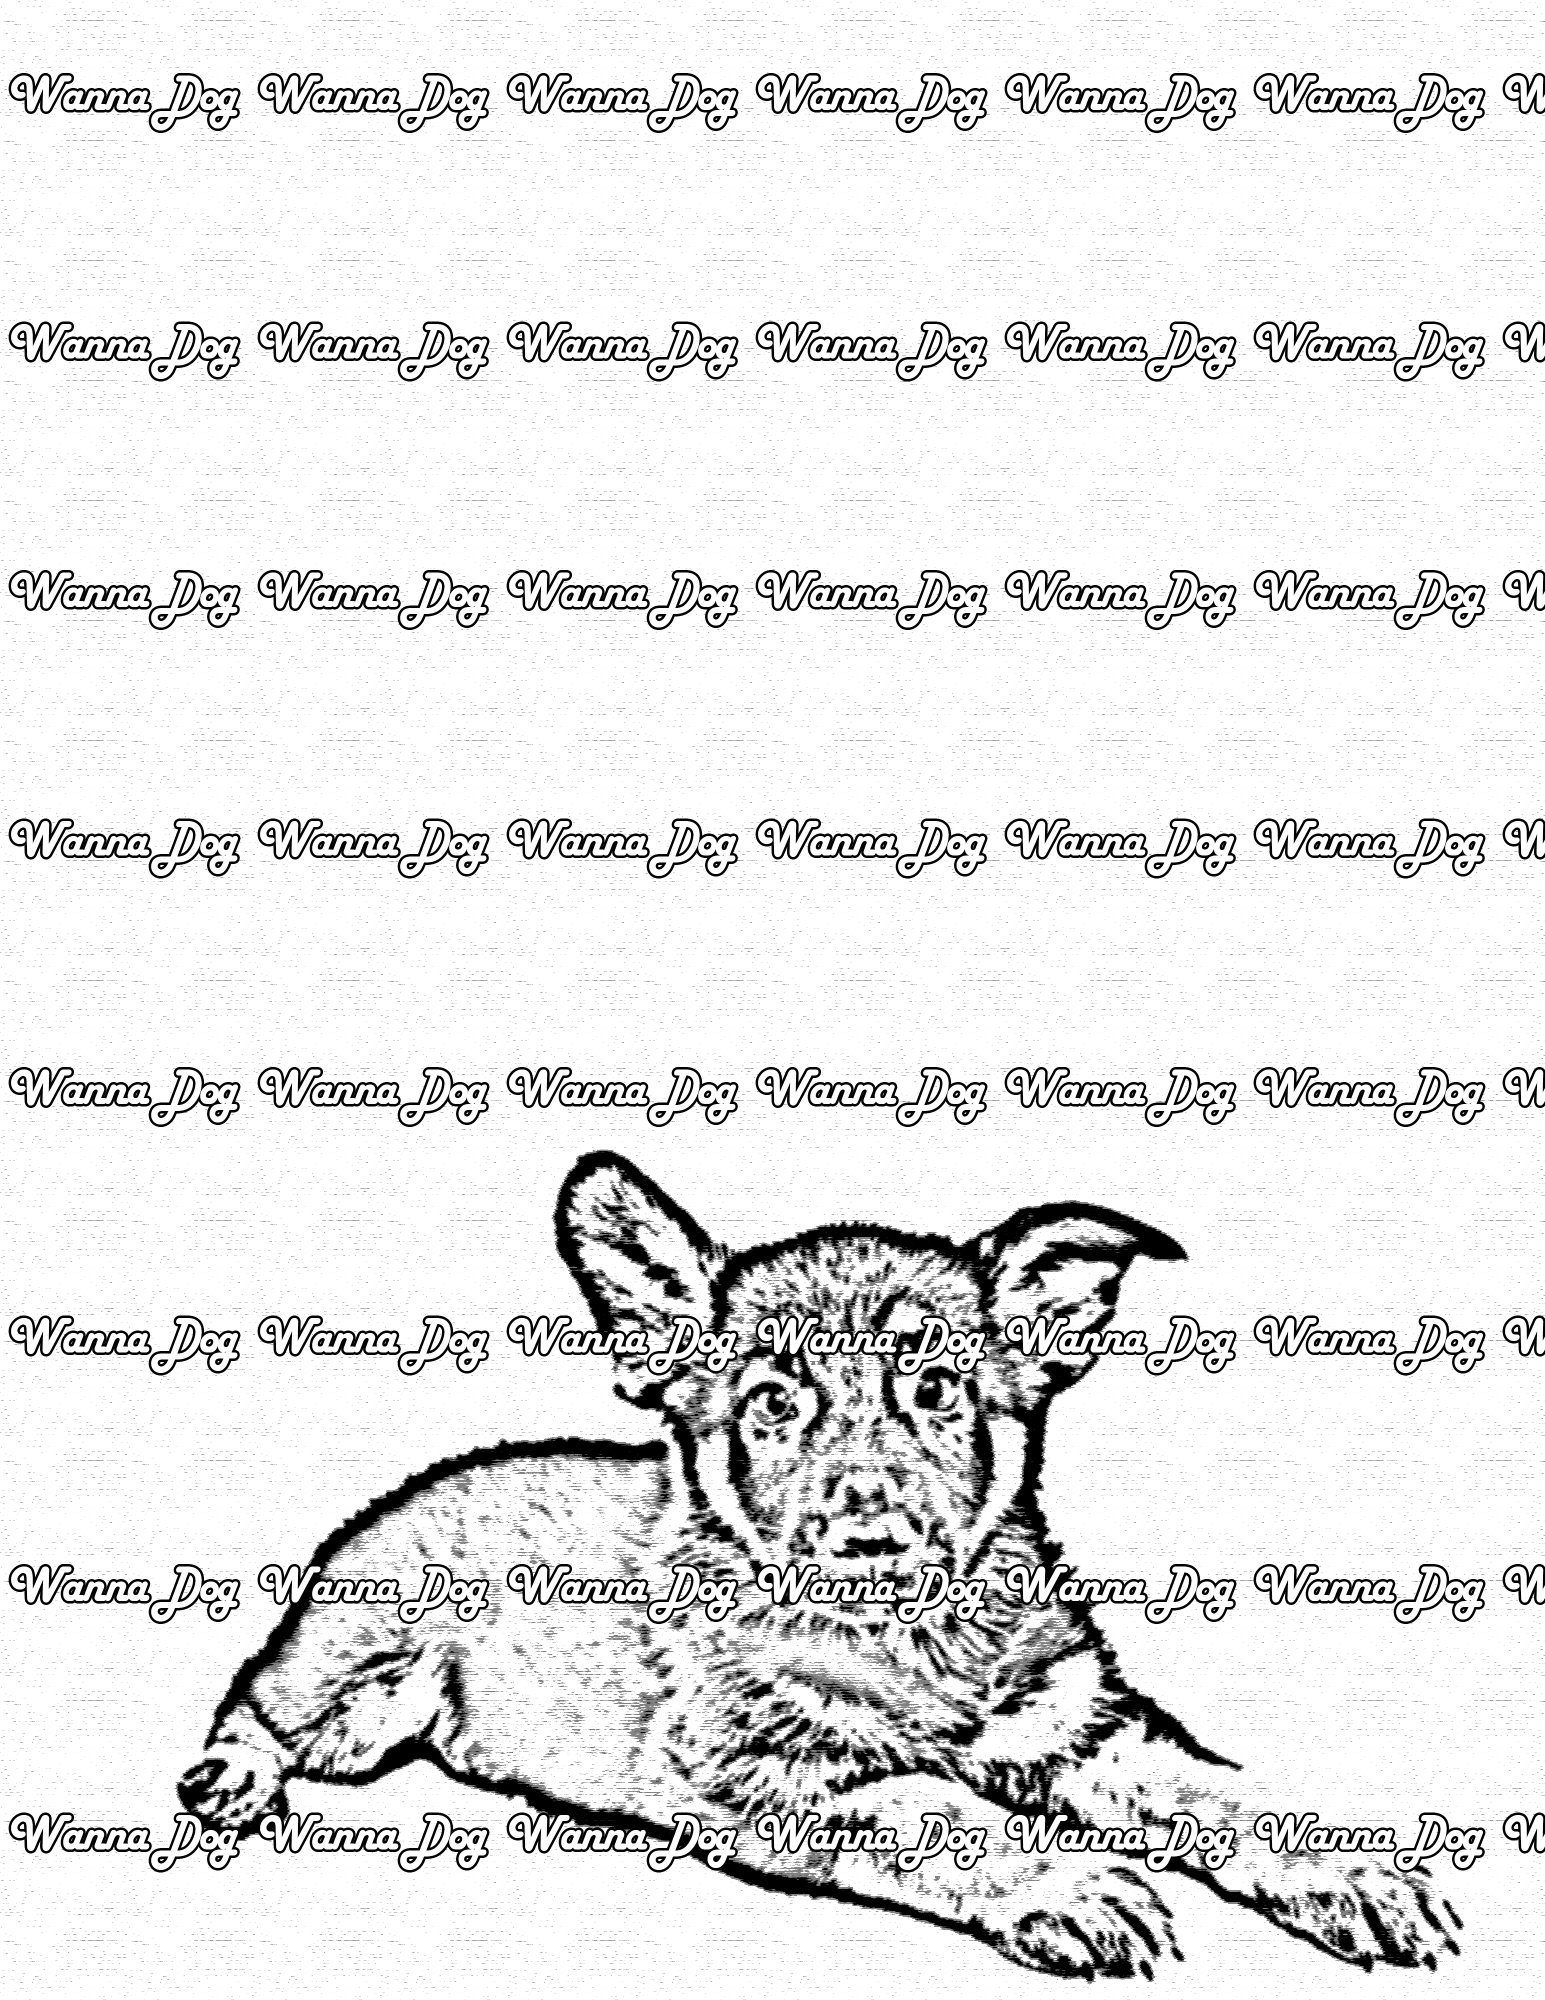 German Shepherd Puppy Coloring Pages of a German Shepherd Puppy with their ears up